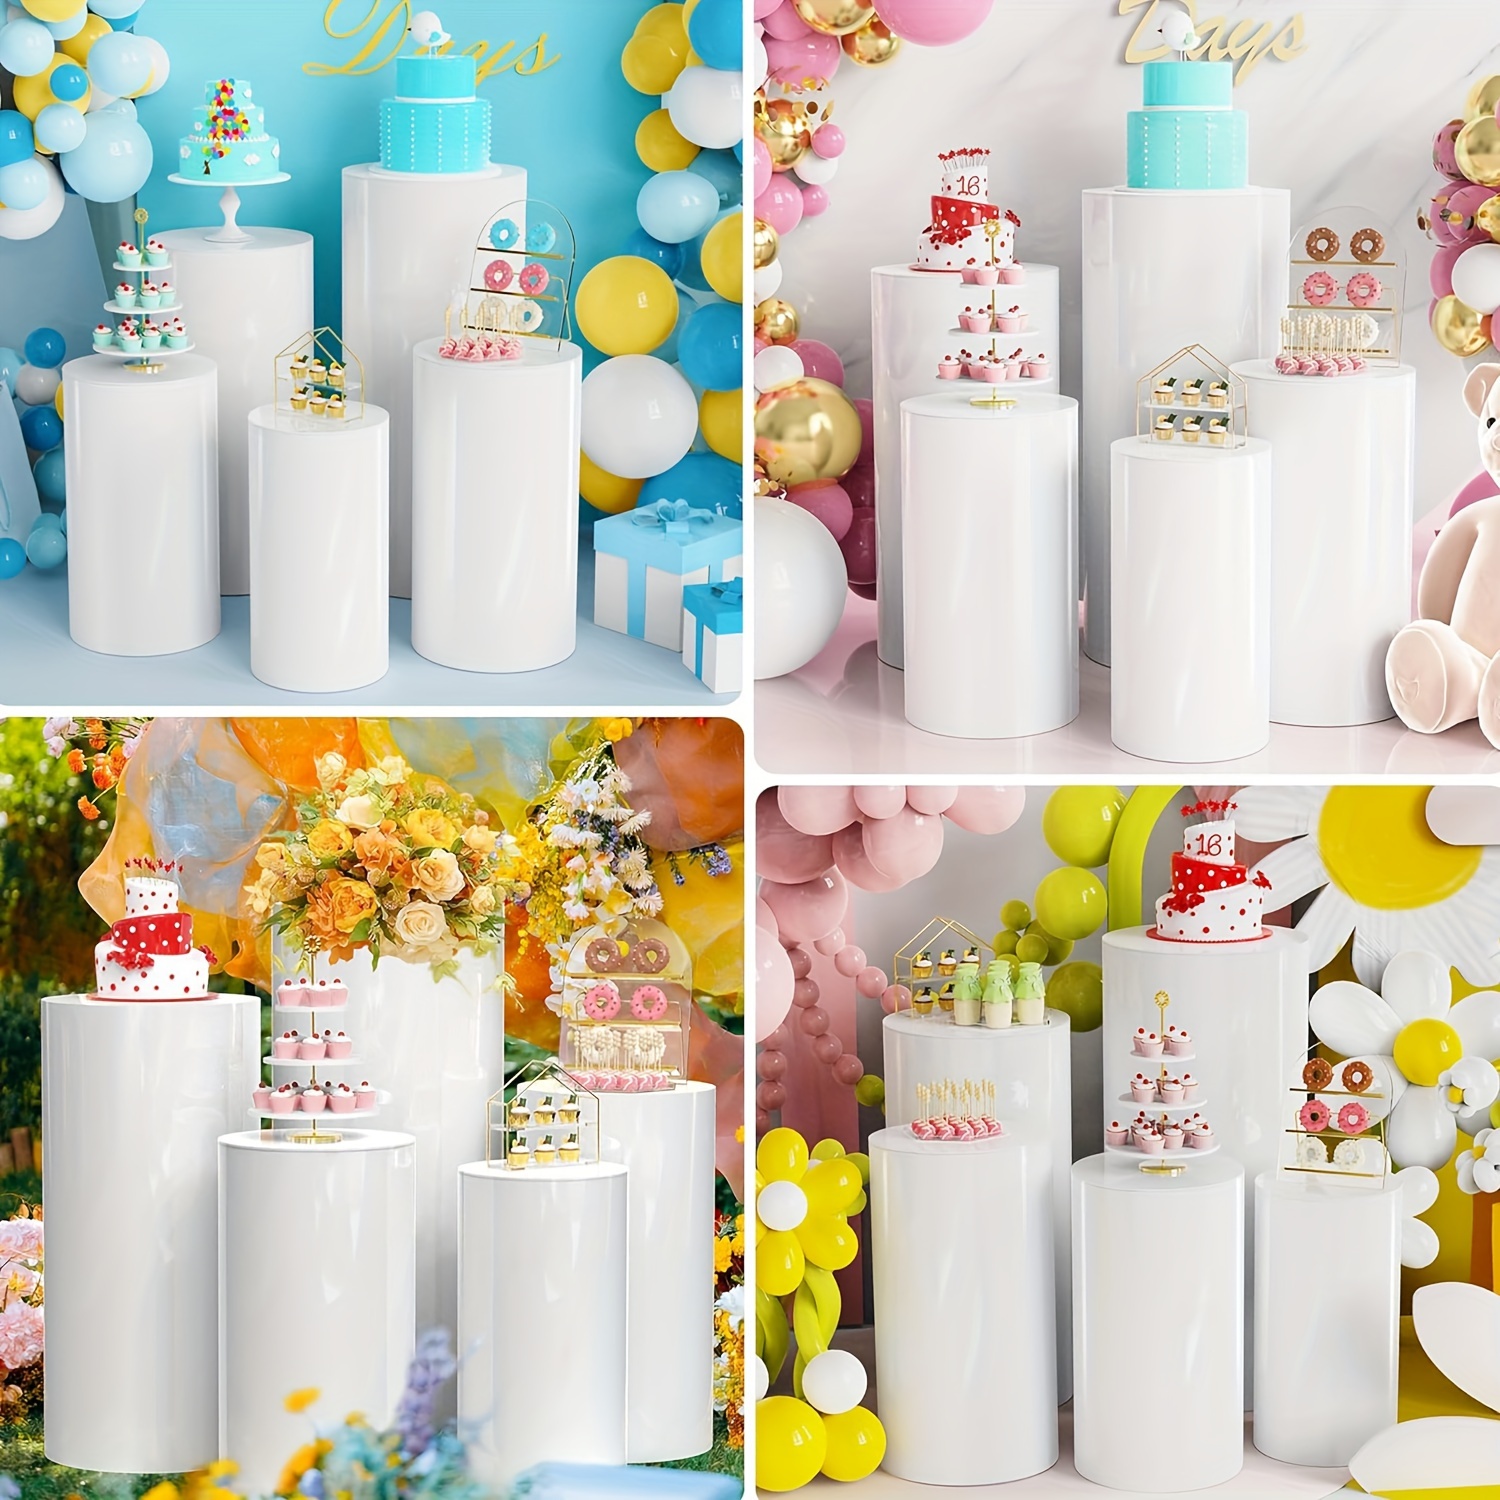 5-Piece Stretch Cylinder Pedestal Covers Set, Polyester Round Column Wraps for Party, Wedding, Birthday, Anniversary, and Graduation Decor, Universal Fit for Dessert Display Stands - Includes Covers Only, No Cylinder Pedestals.